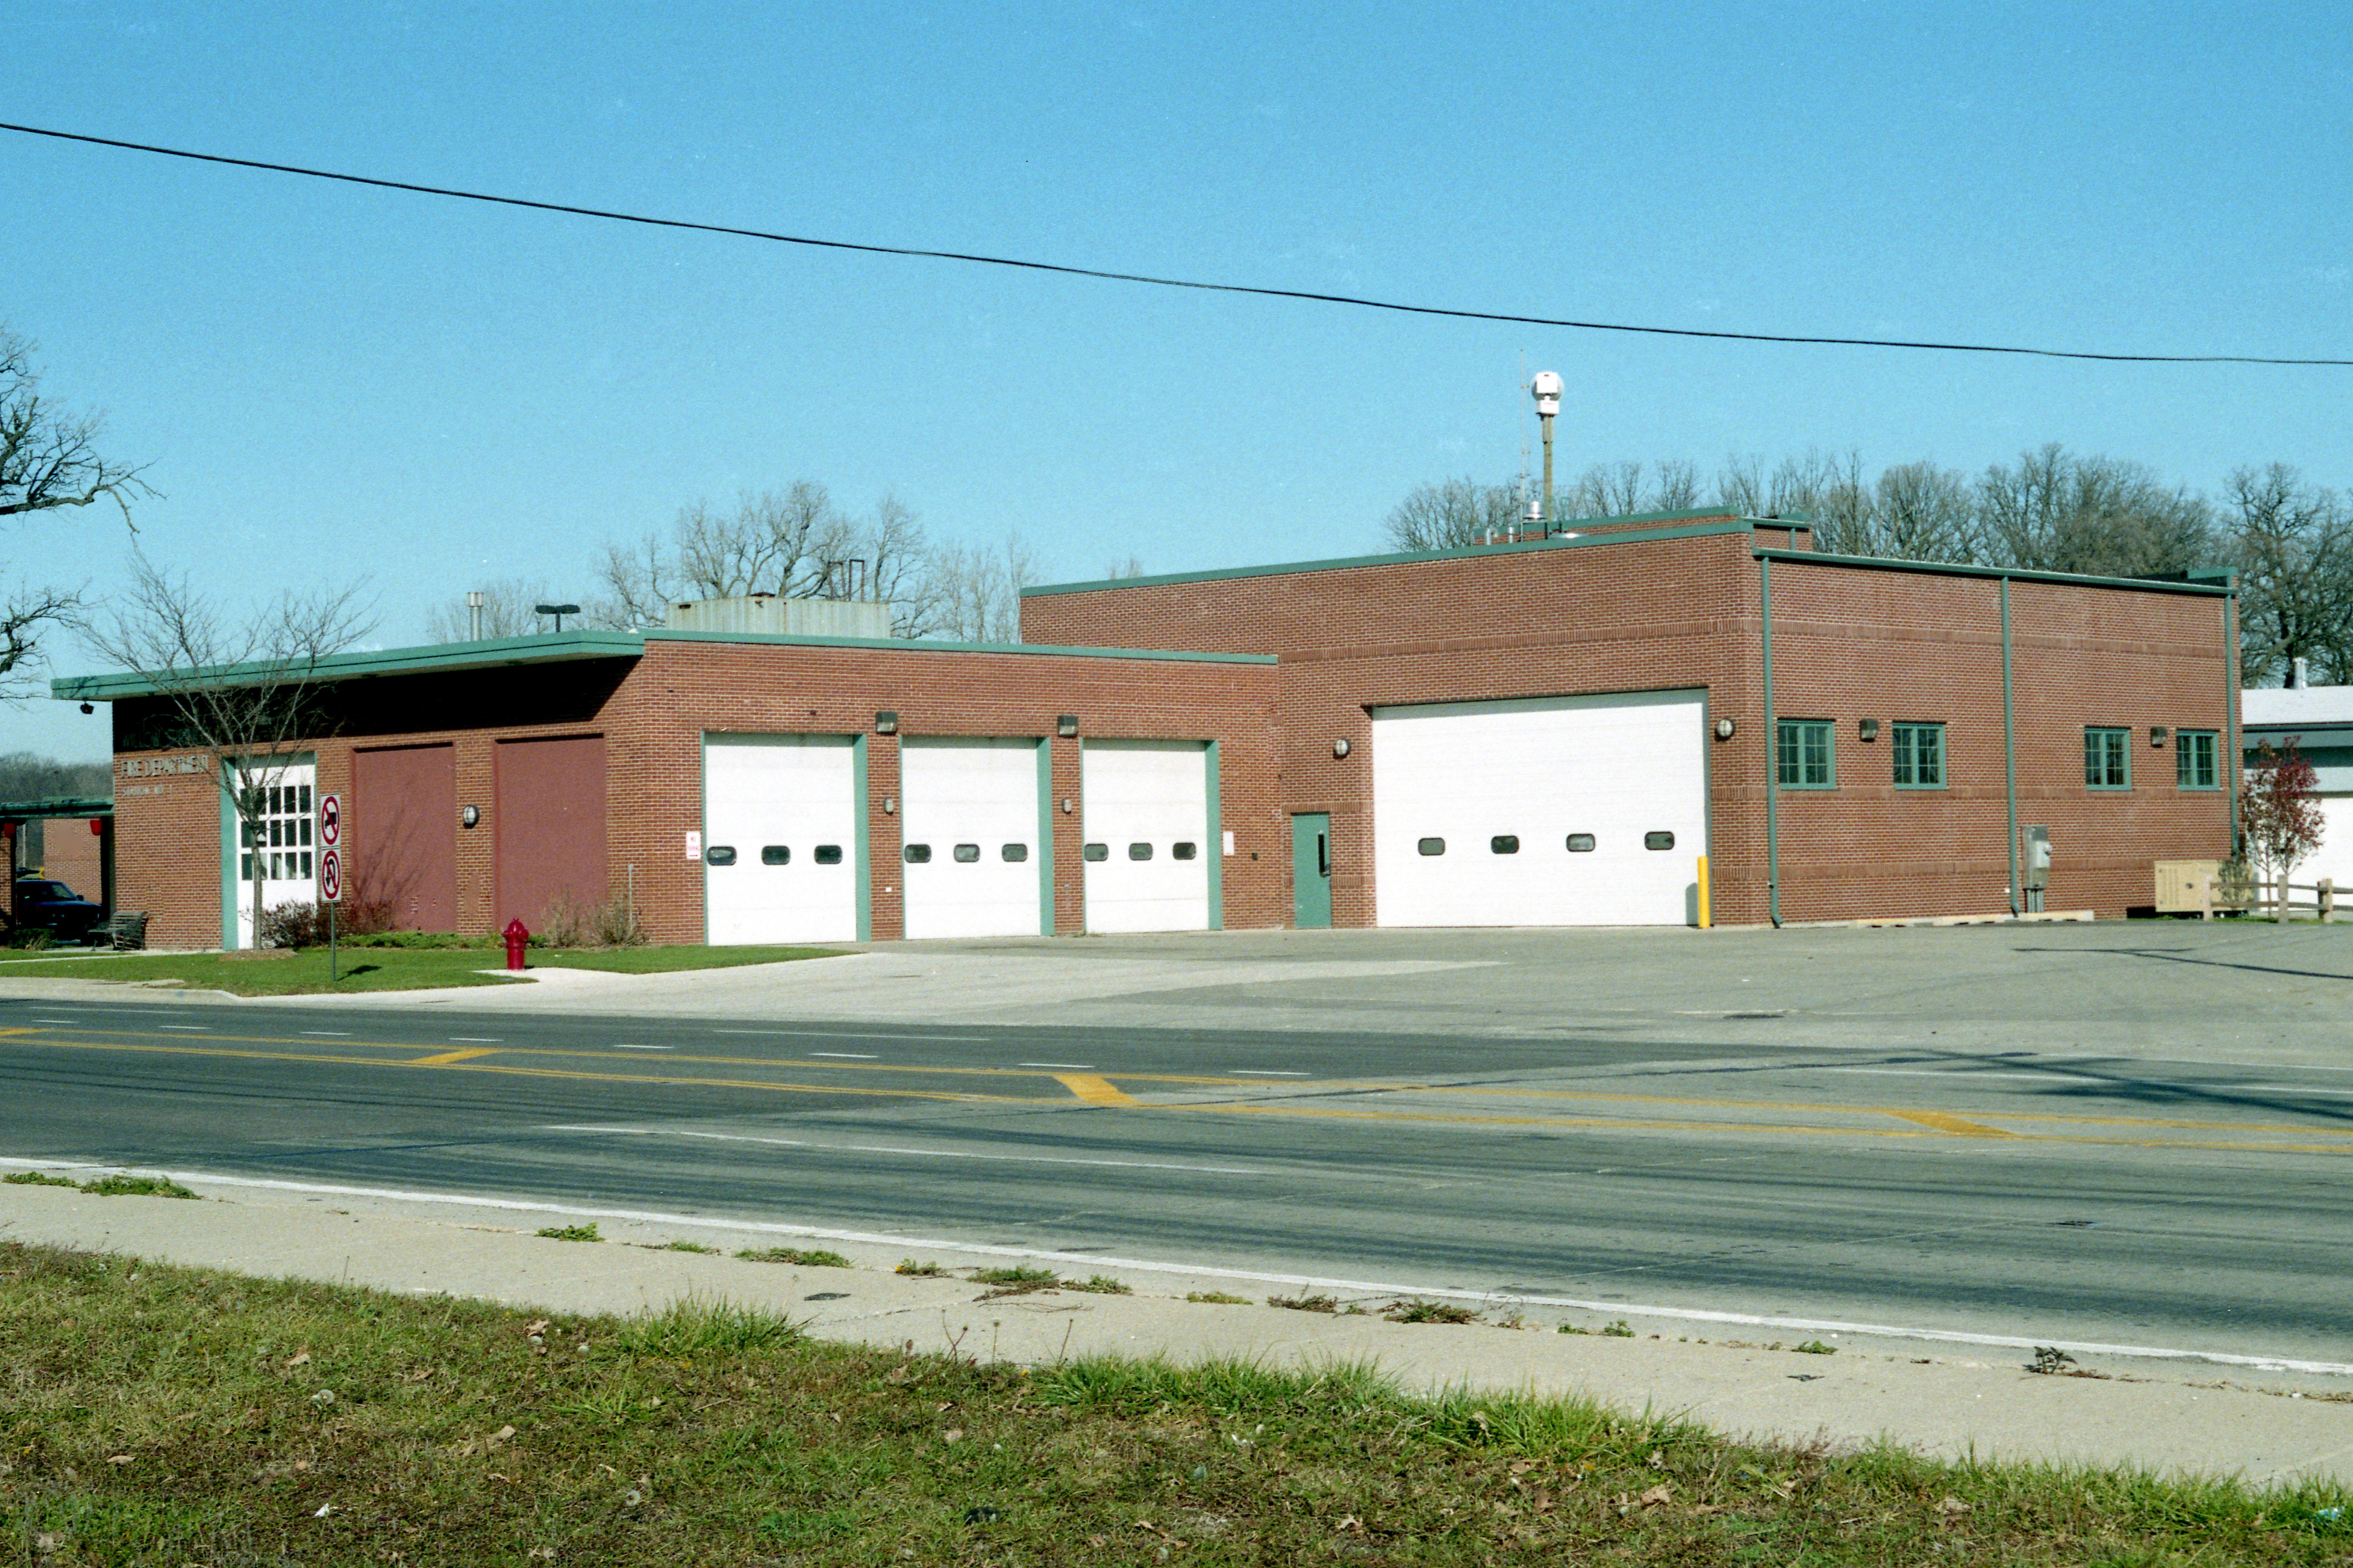 WILLOW SPRINGS FD AFTER THE ADDITION